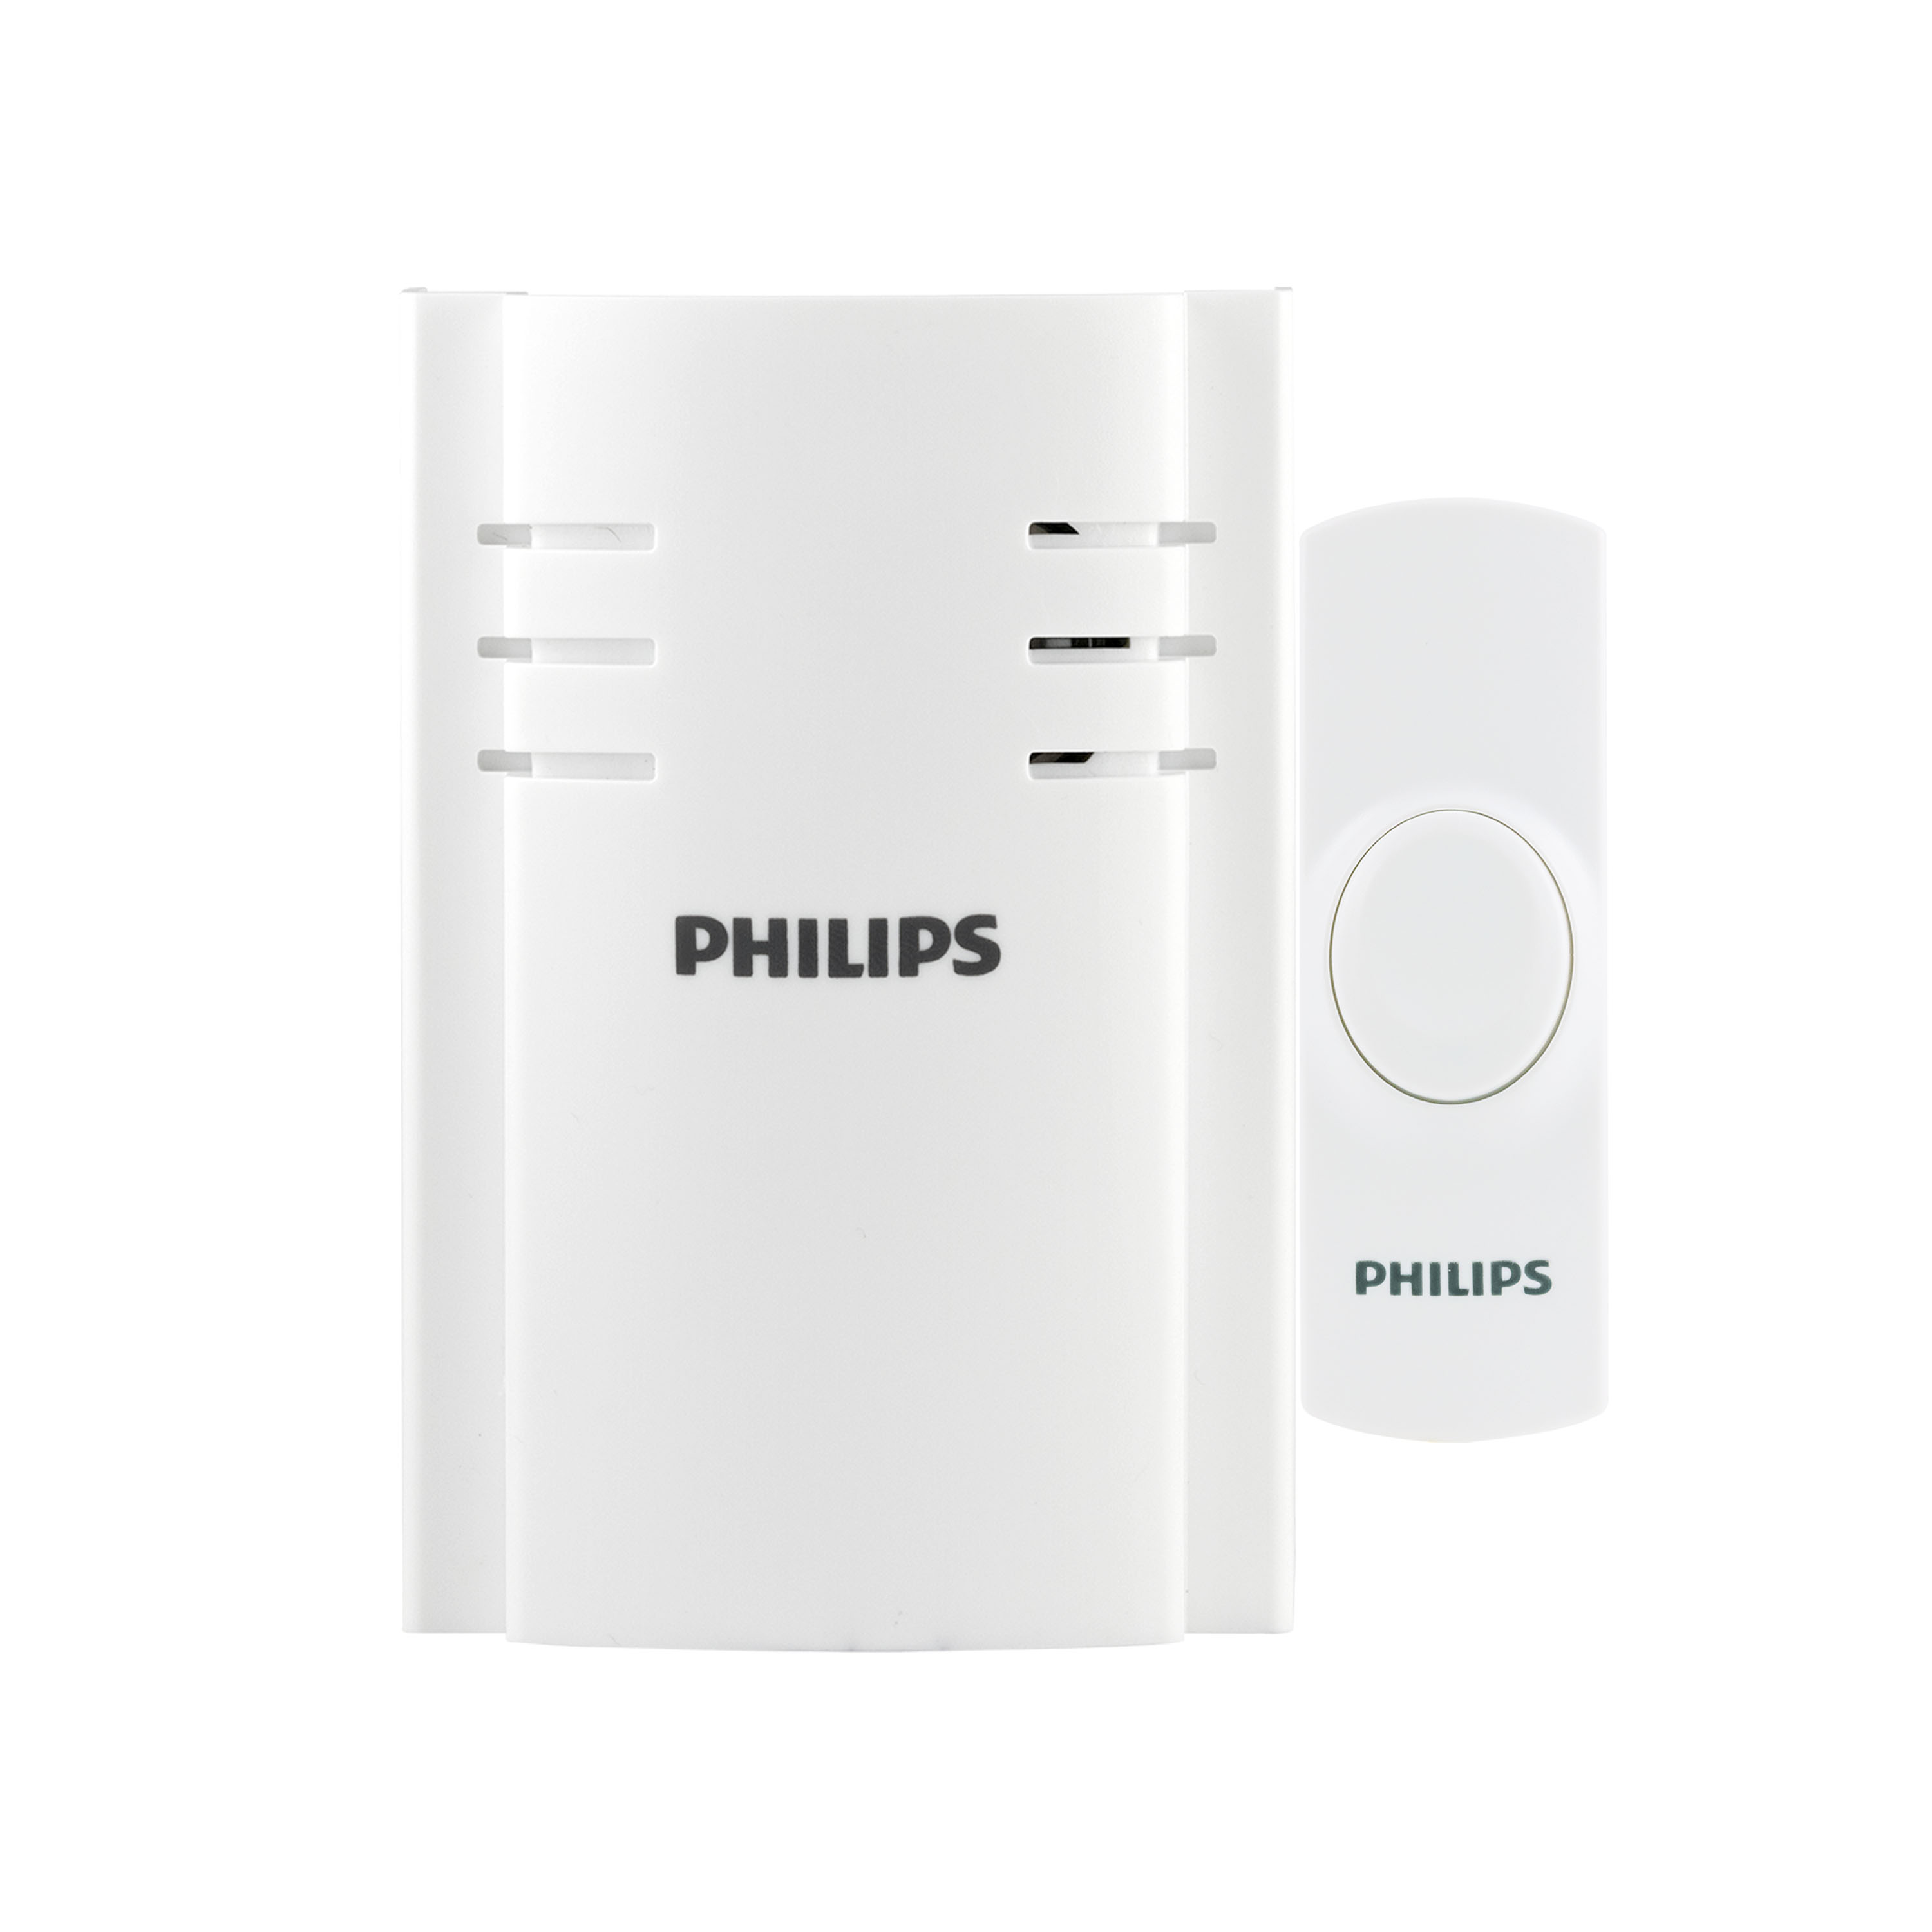 Philips Plug-in 2-Melody Doorbell Kit, White, DES2120W/27 - image 1 of 9